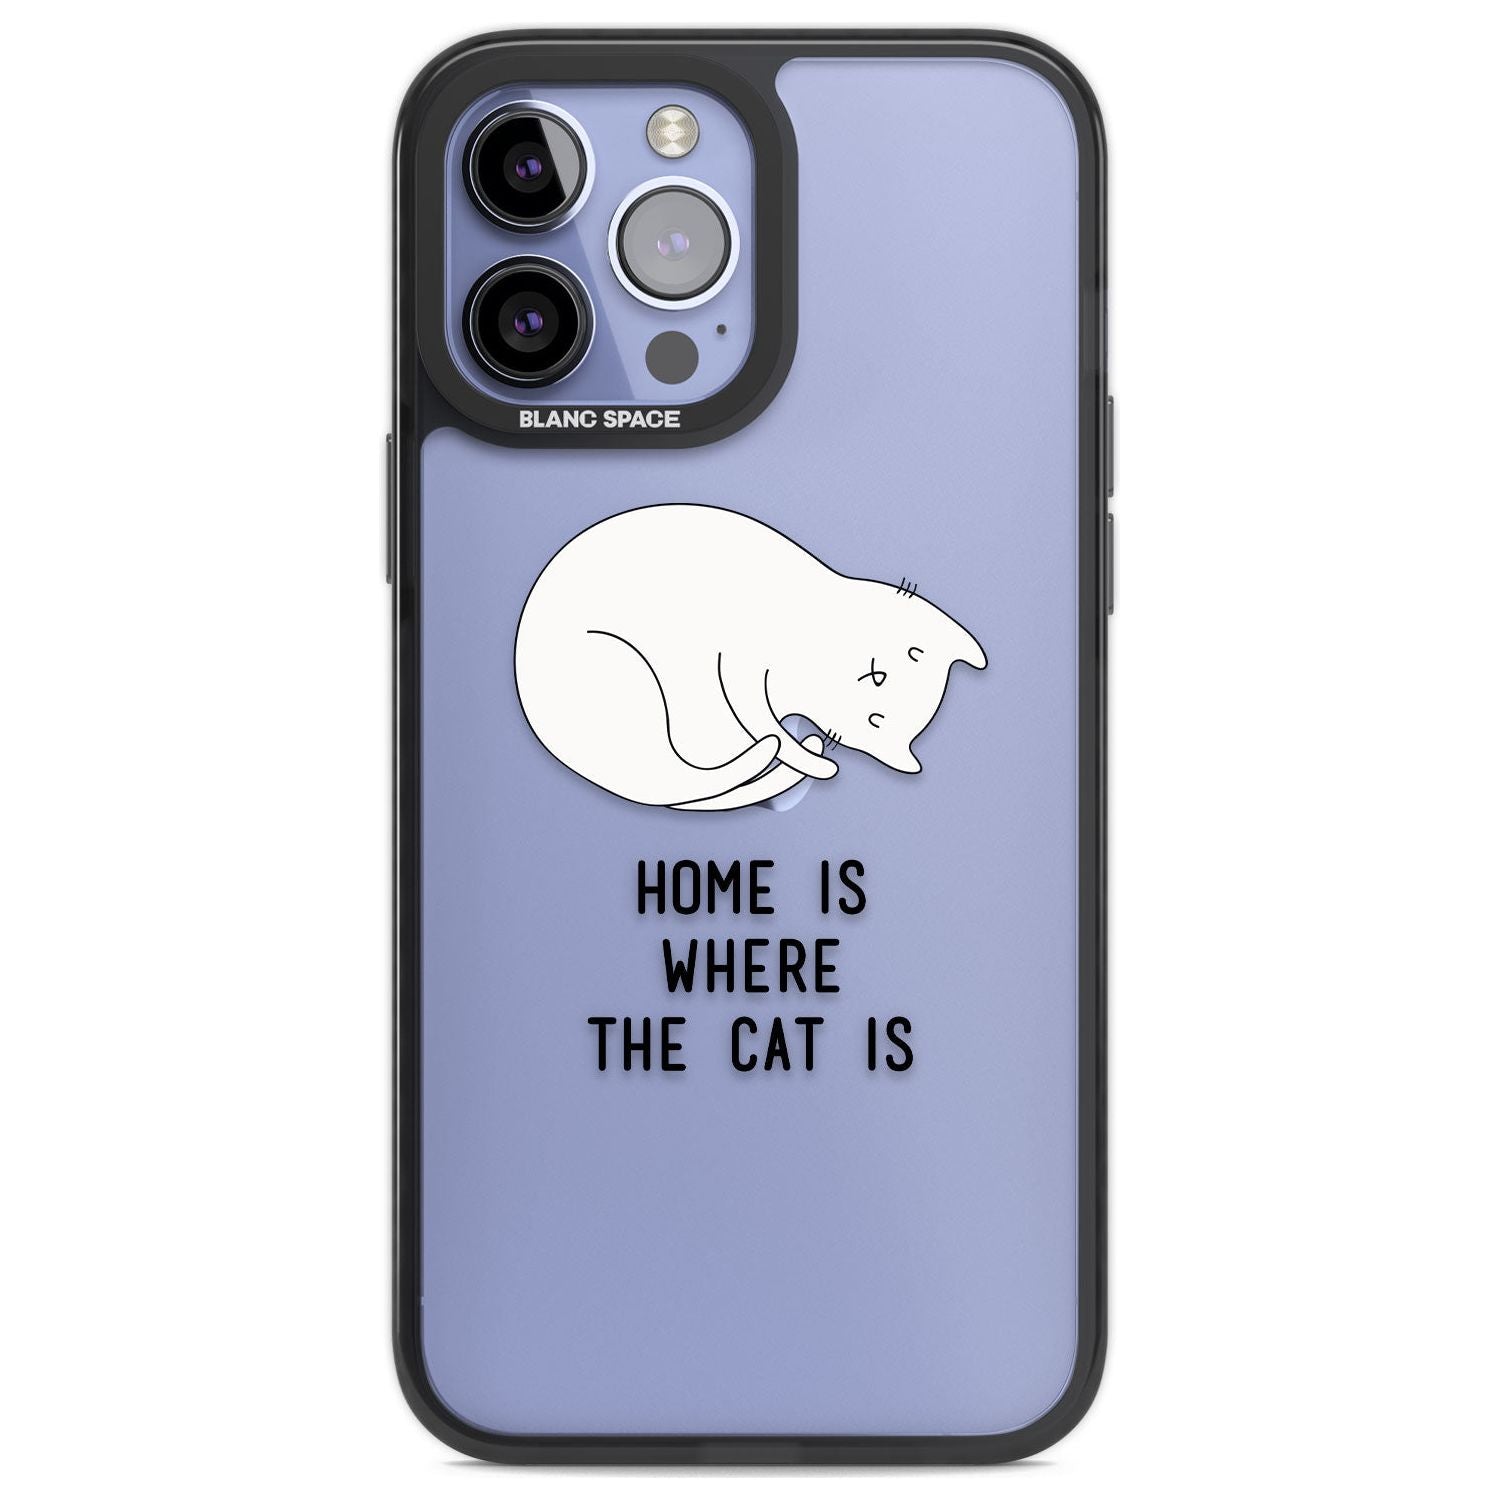 Home Is Where the Cat is Phone Case iPhone 13 Pro Max / Black Impact Case,iPhone 14 Pro Max / Black Impact Case Blanc Space